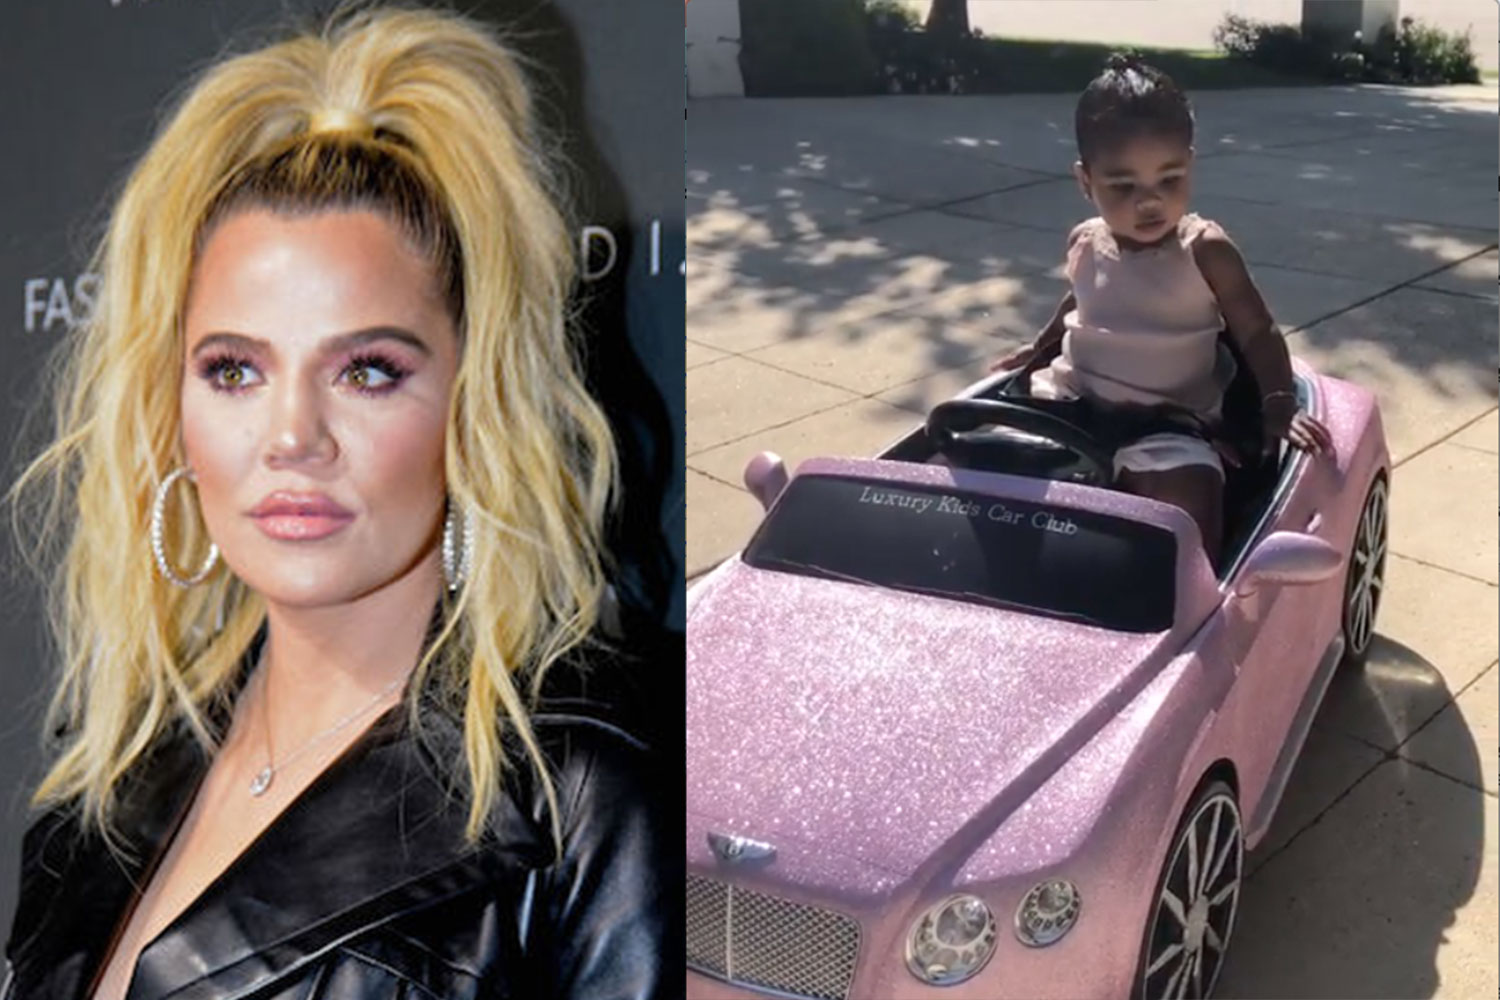 Khloe Kardashian is being blasted for sharing this video of her daughter True